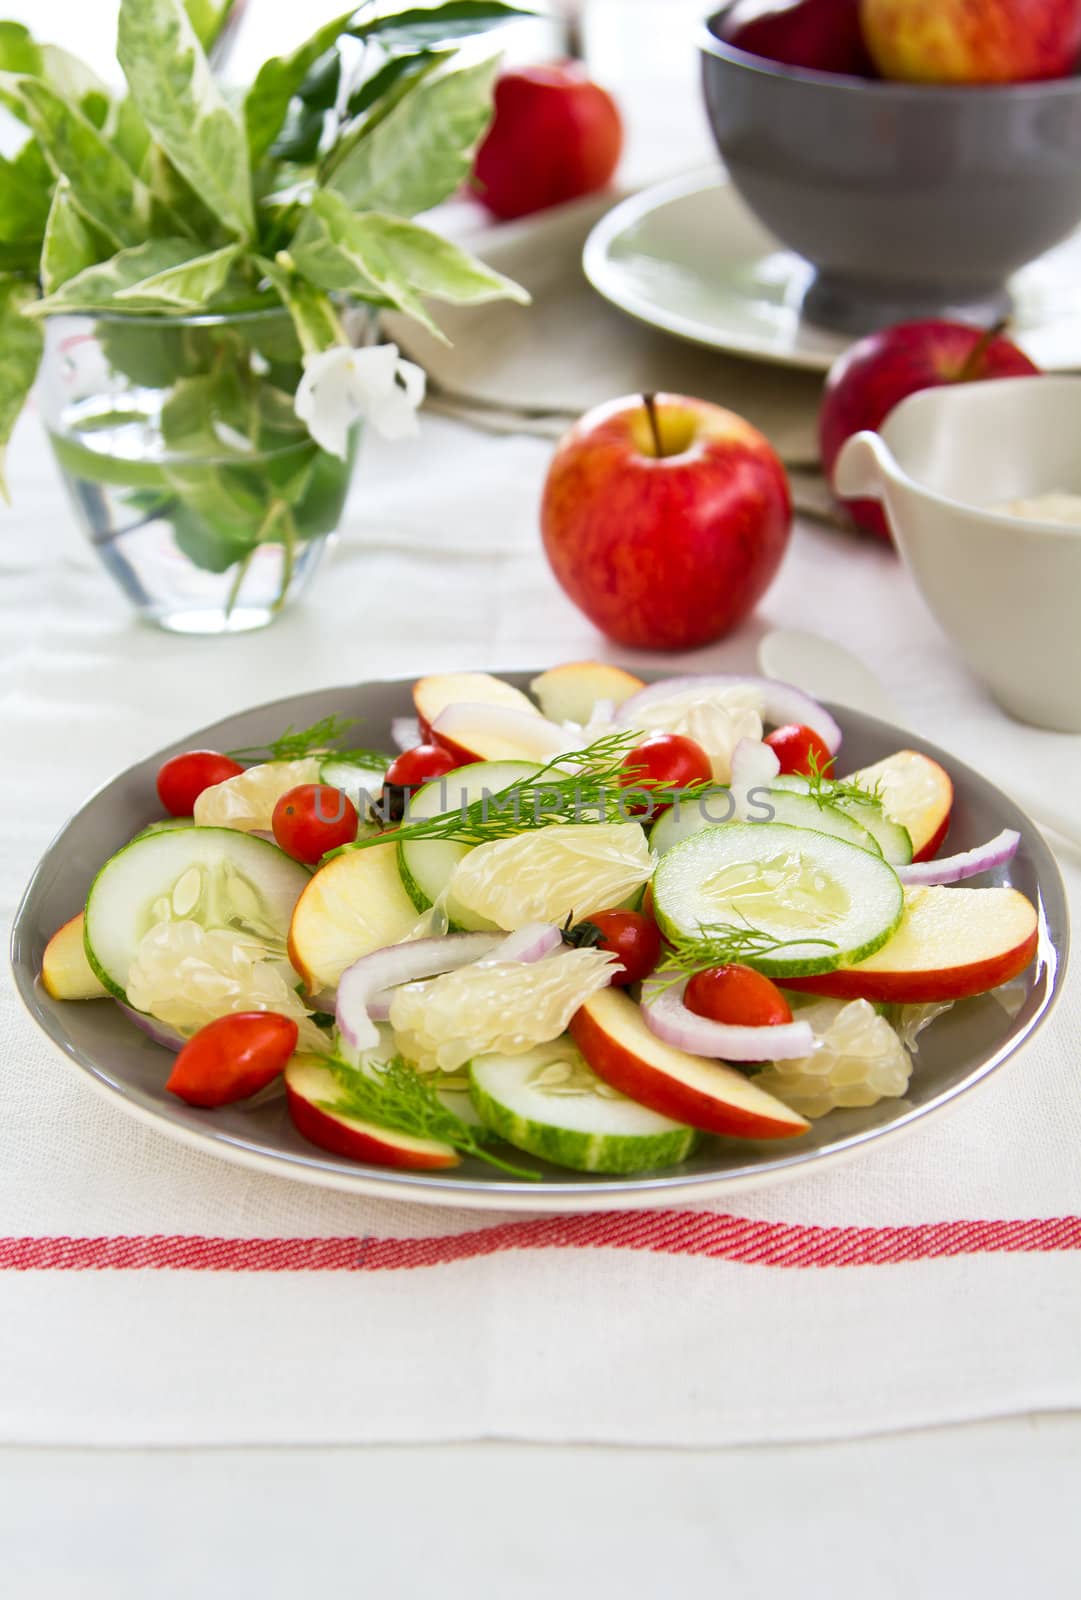 Apple and Grapefruit salad by vanillaechoes